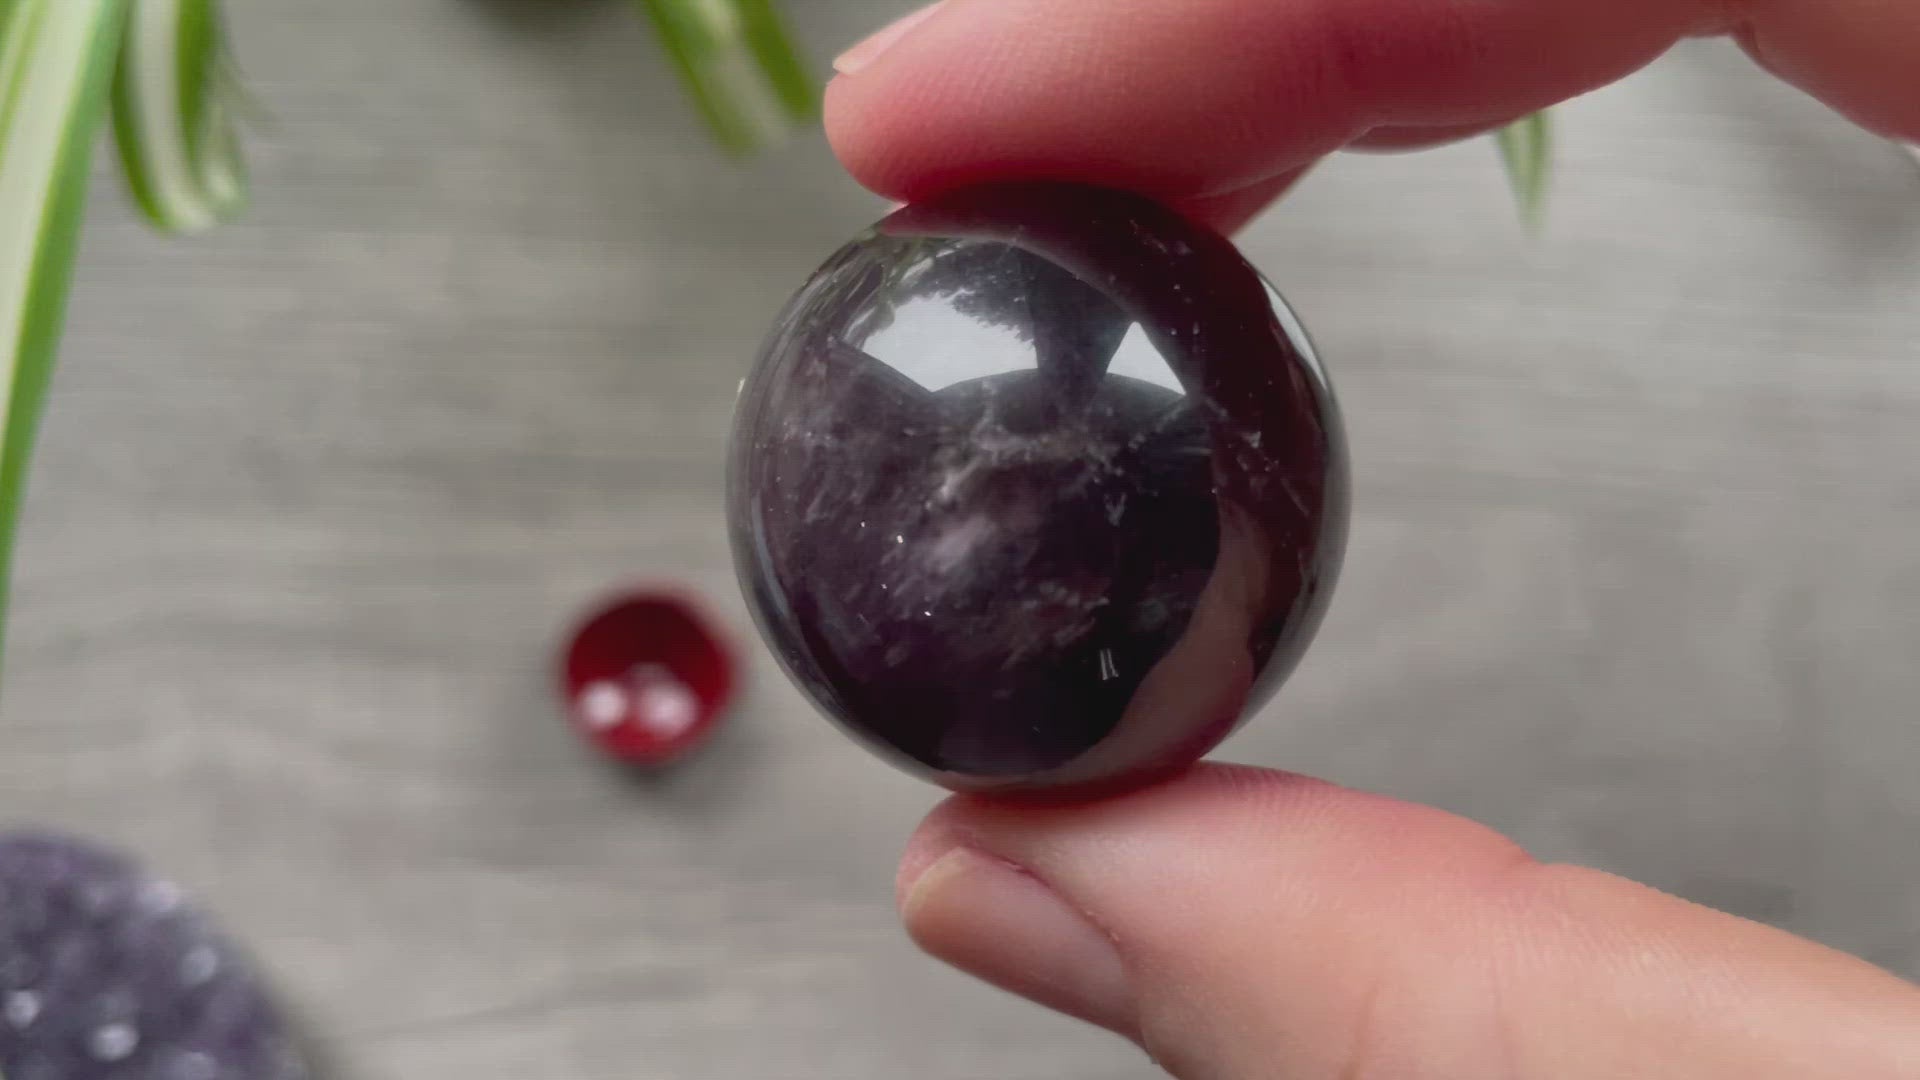 A polished sphere of amethyst is shown in the image. The crystal is a purple color and has a smooth, shiny surface.